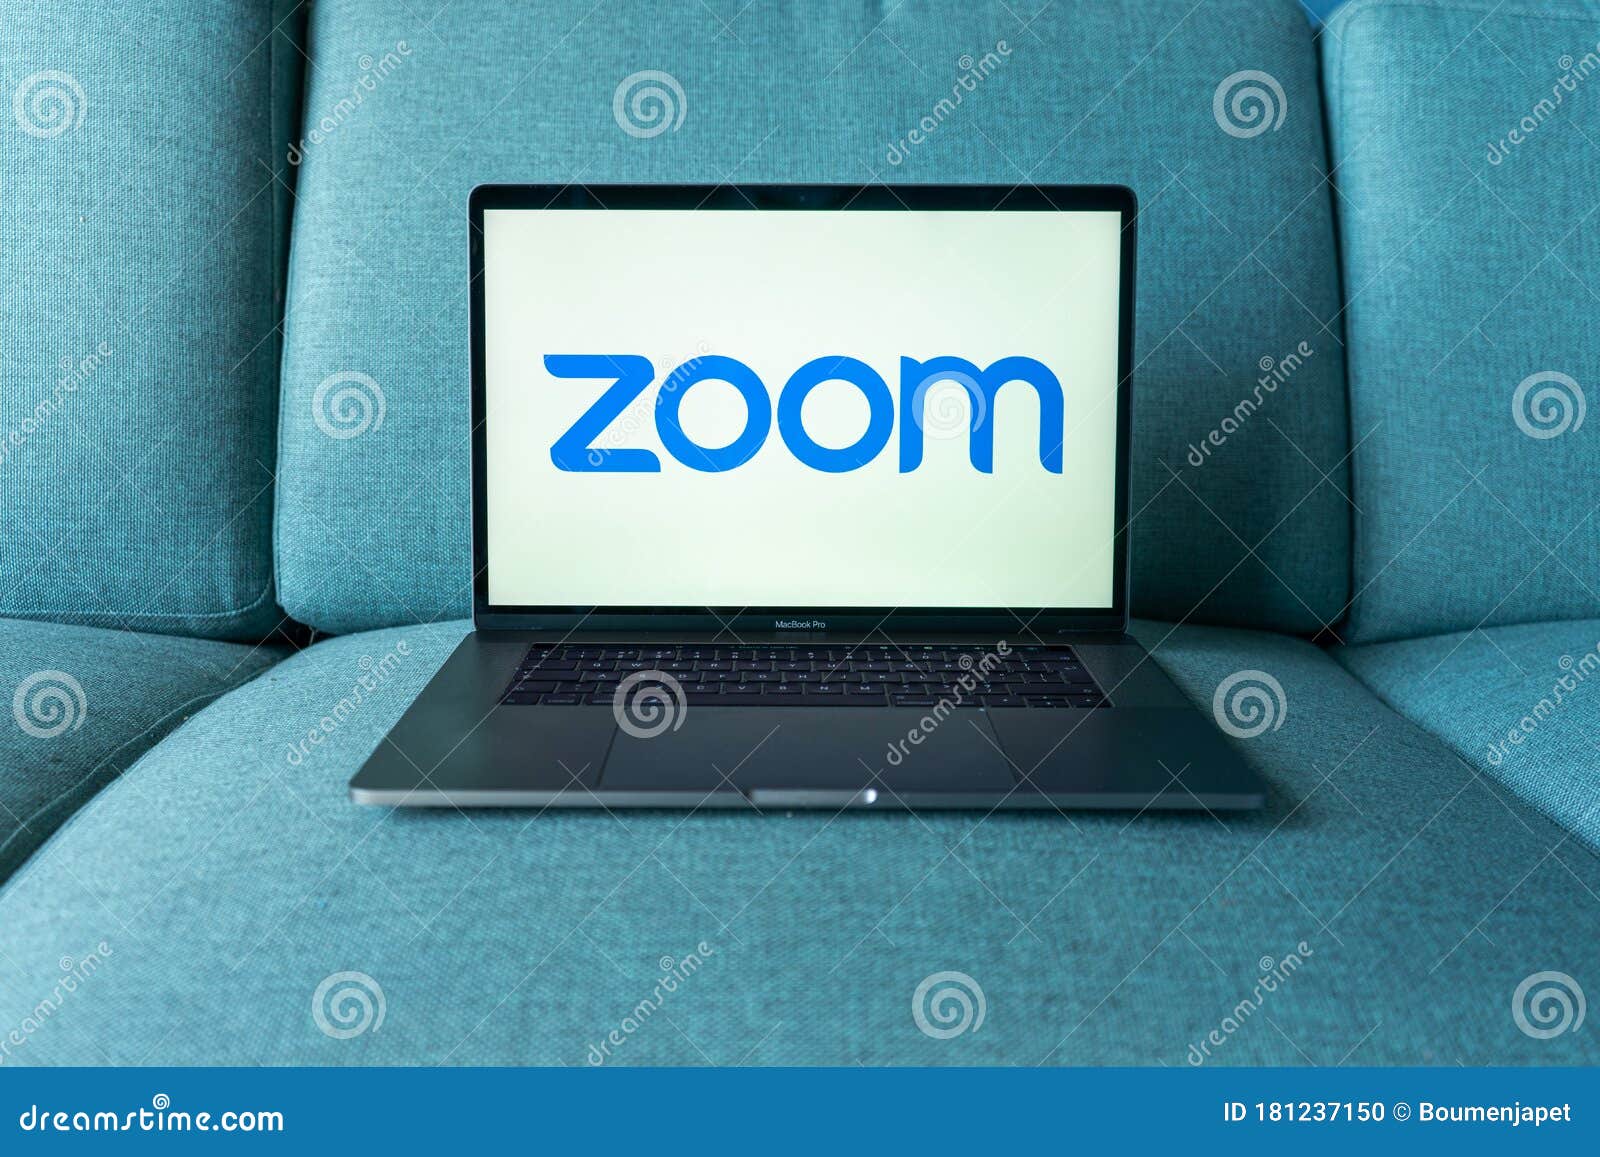 how to download zoom cloud meeting on hp laptop